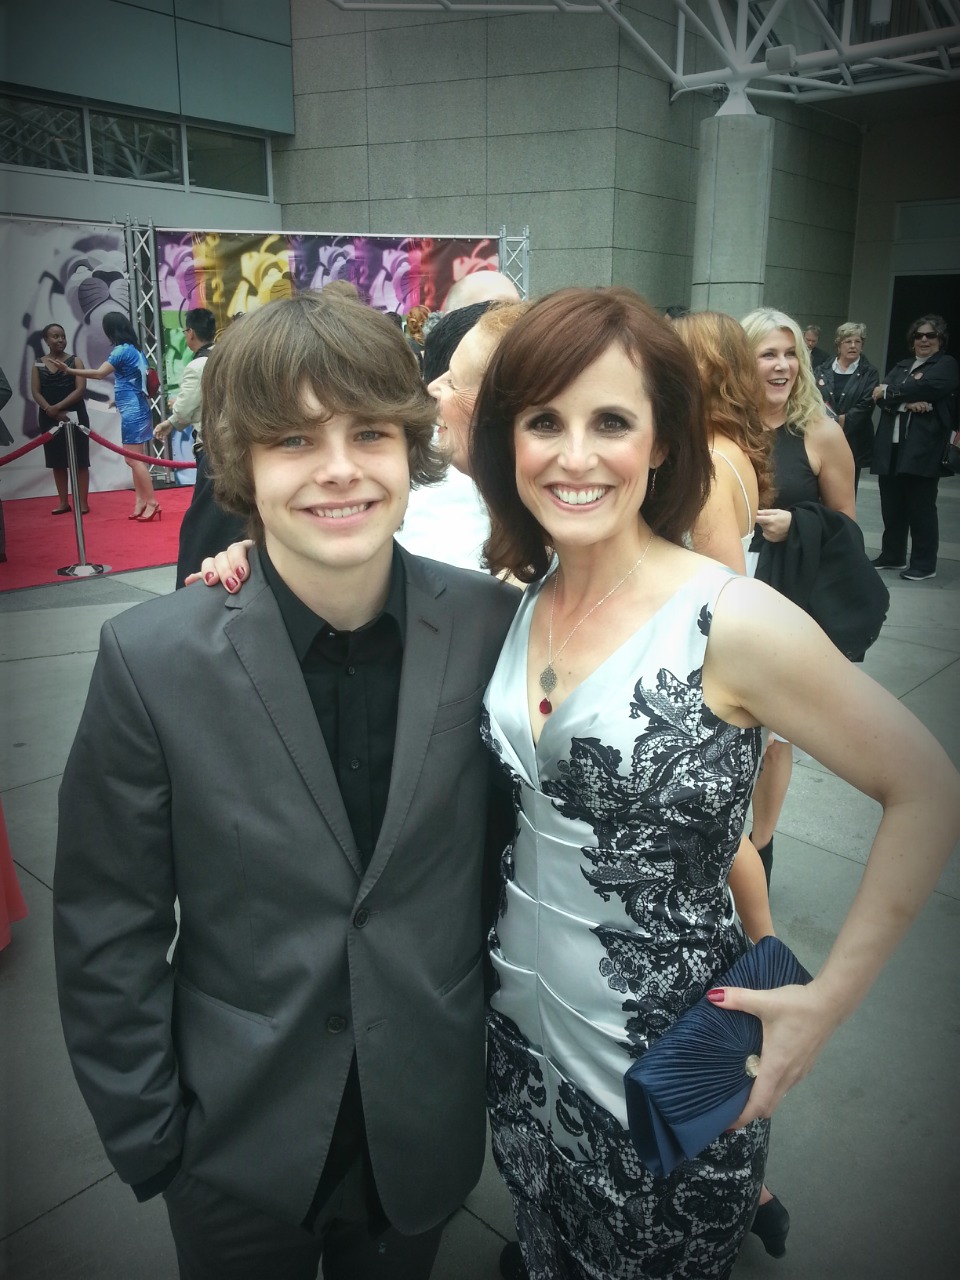 Enid-Raye Adams with Brendan Meyer - Red Carpet at the 15th Annual Leo Awards Gala.